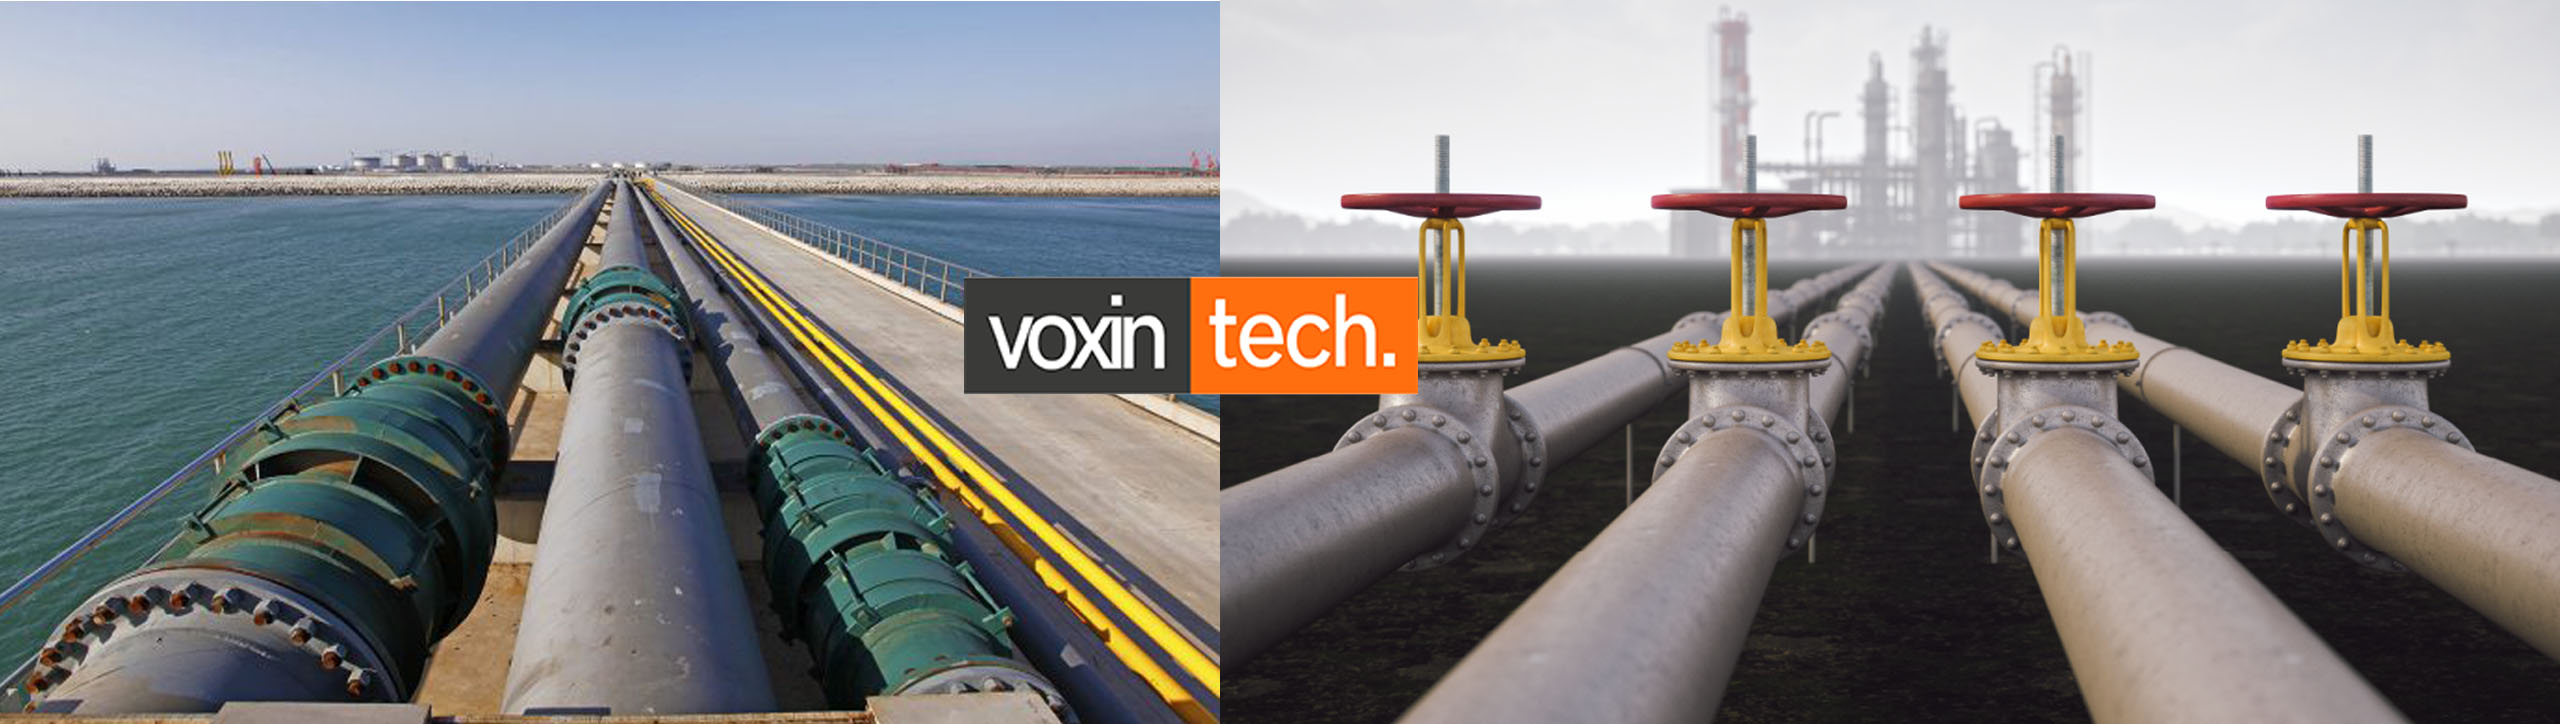 Voxintech VIbration Sensor Manufacturer & Supplier in India, Industrial Vibration Monitoring Sensor for CNG Gas Pipeline Industry in India, Vibration Sensor for CNG Gas Pipeline Industry in India, Vibration Sensor for Industrial Manufacturer Plants, Vibration Sensor Supplier in India.